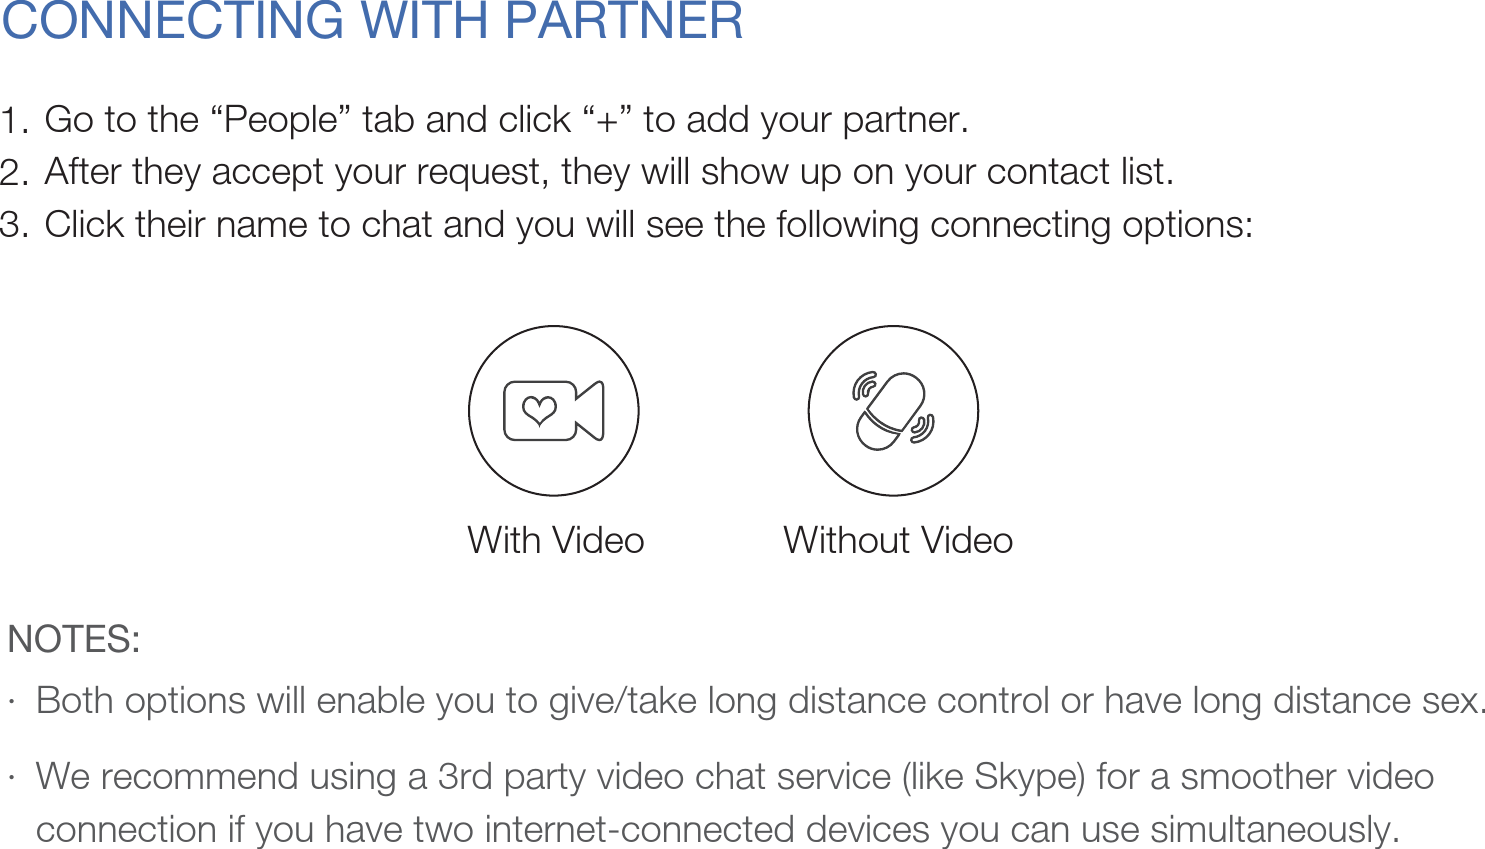 CONNECTING WITH PARTNERGo to the “People” tab and click “+” to add your partner. After they accept your request, they will show up on your contact list.Click their name to chat and you will see the following connecting options: 1.2.3.Both options will enable you to give/take long distance control or have long distance sex.We recommend using a 3rd party video chat service (like Skype) for a smoother video connection if you have two internet-connected devices you can use simultaneously. · · NOTES: With Video Without Video